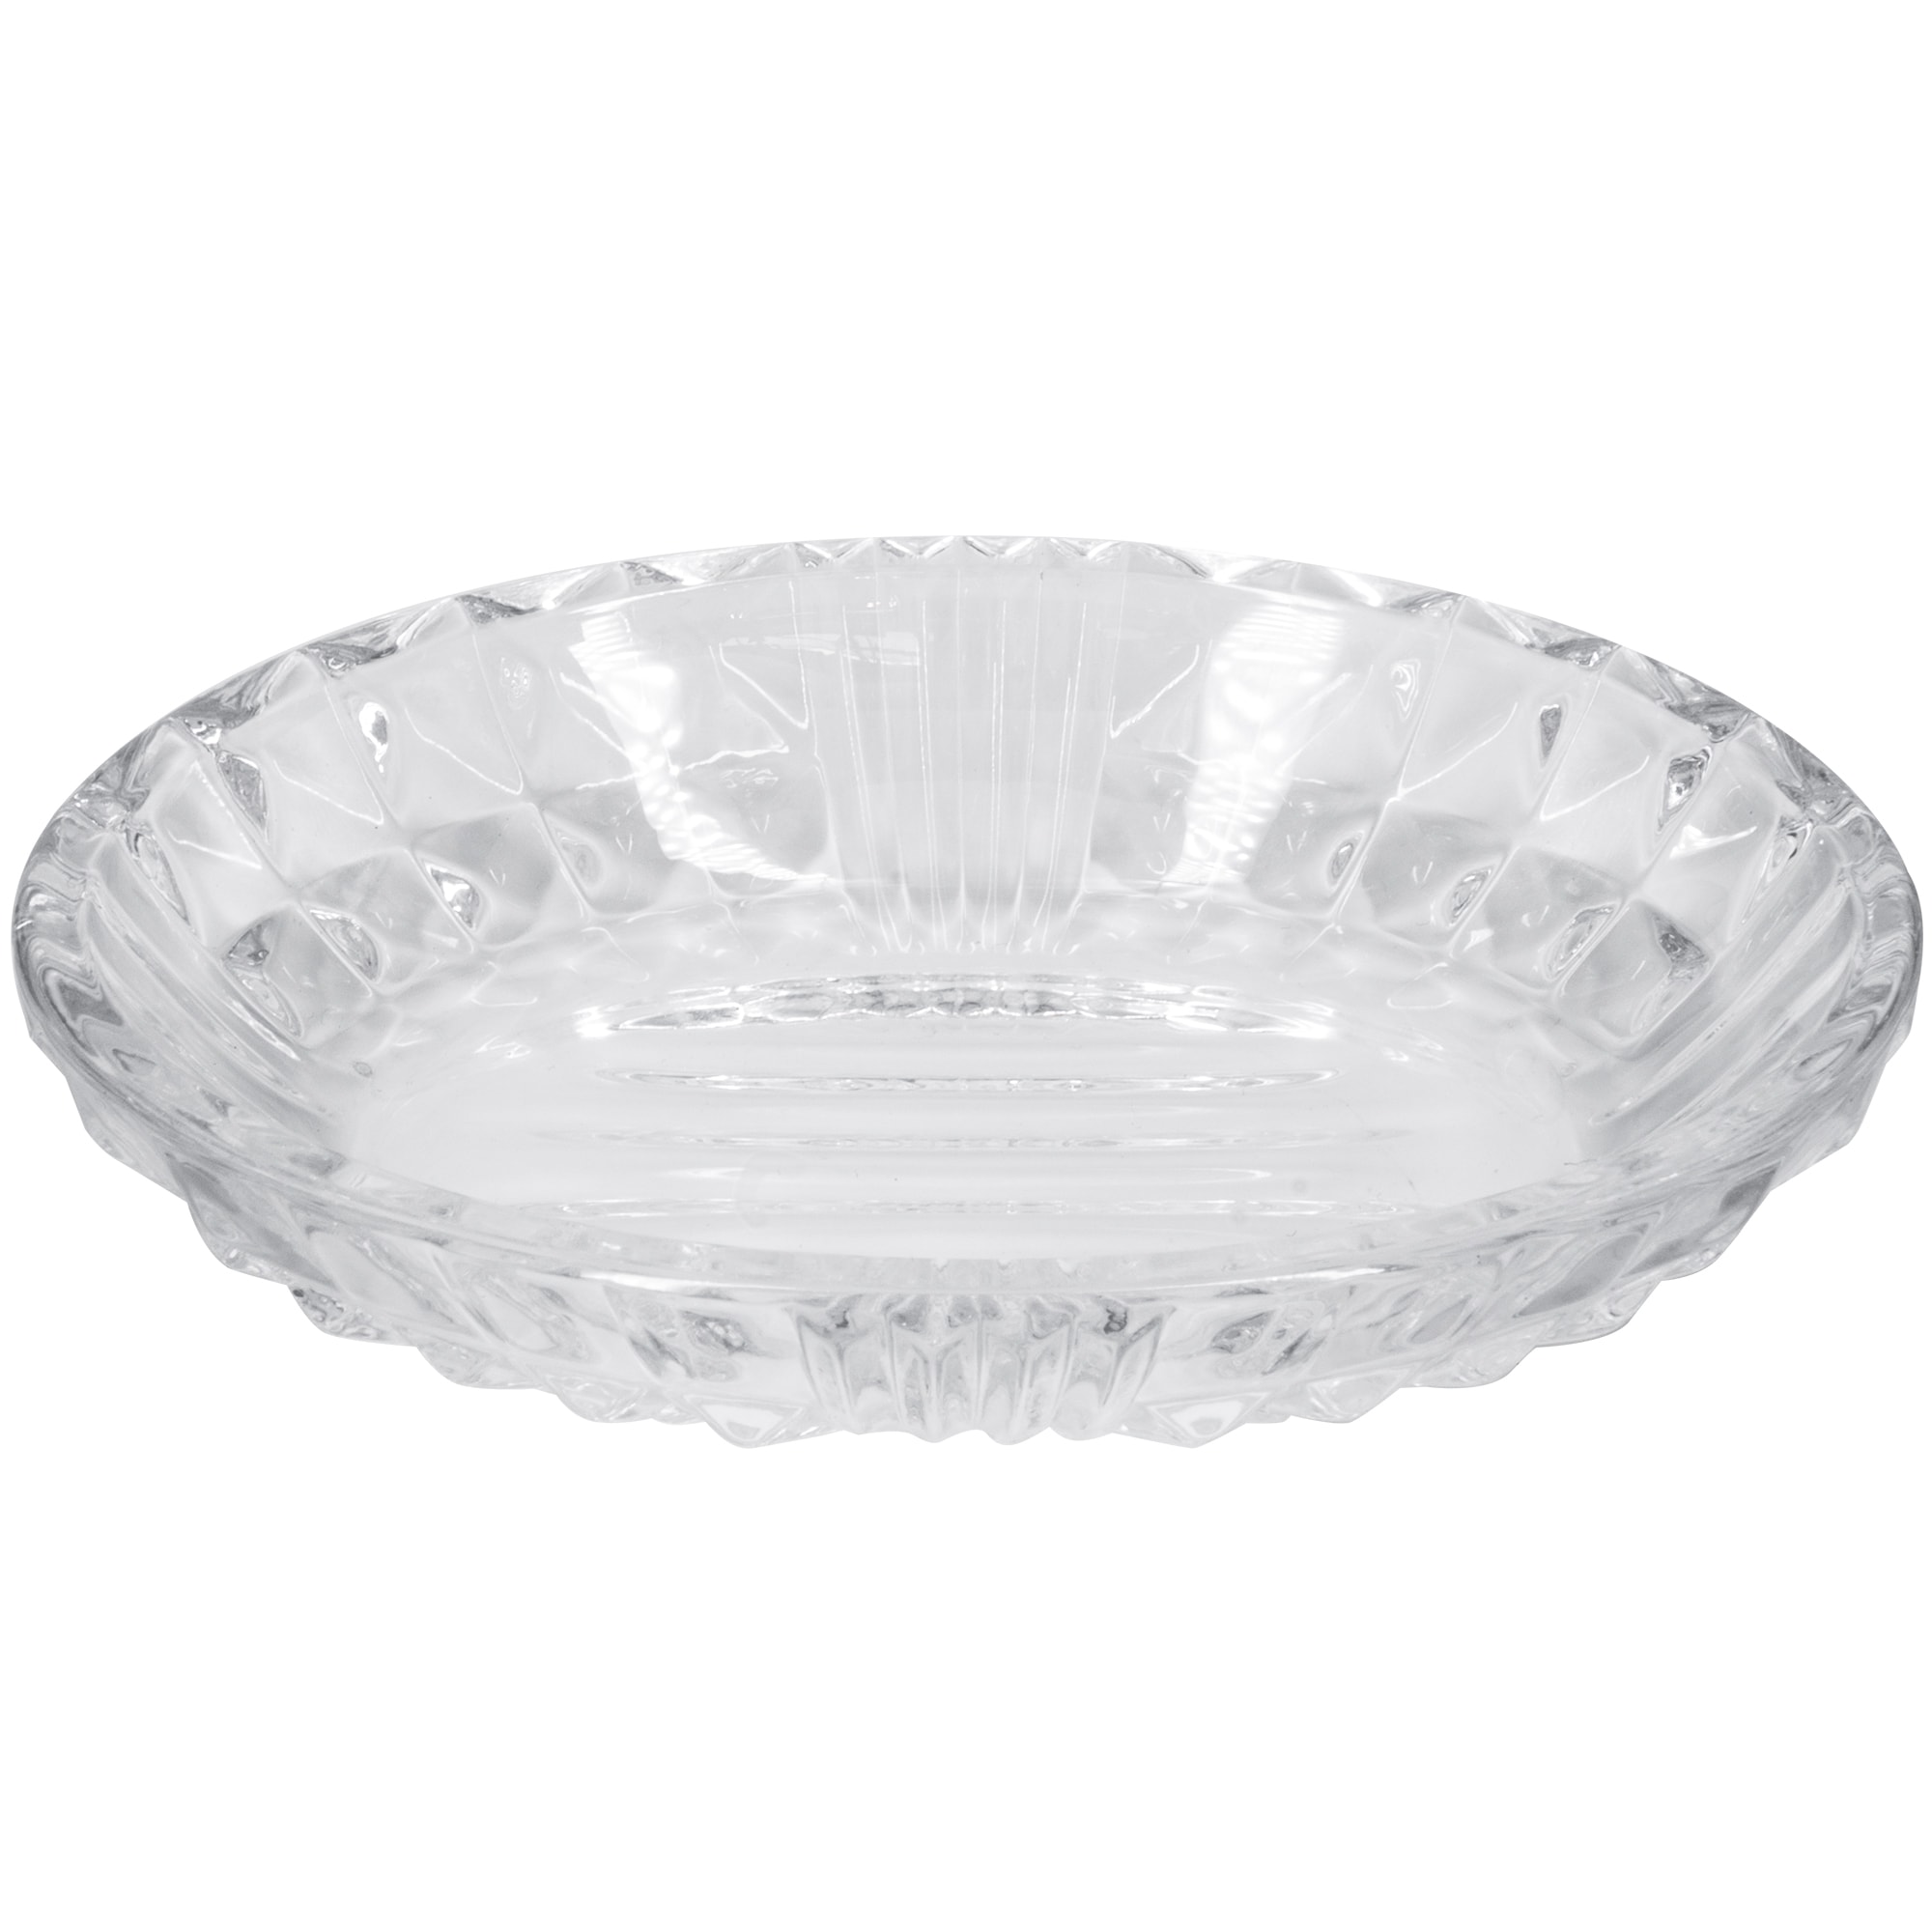 Bath Bliss Suction Cup Soap Dish, Clear